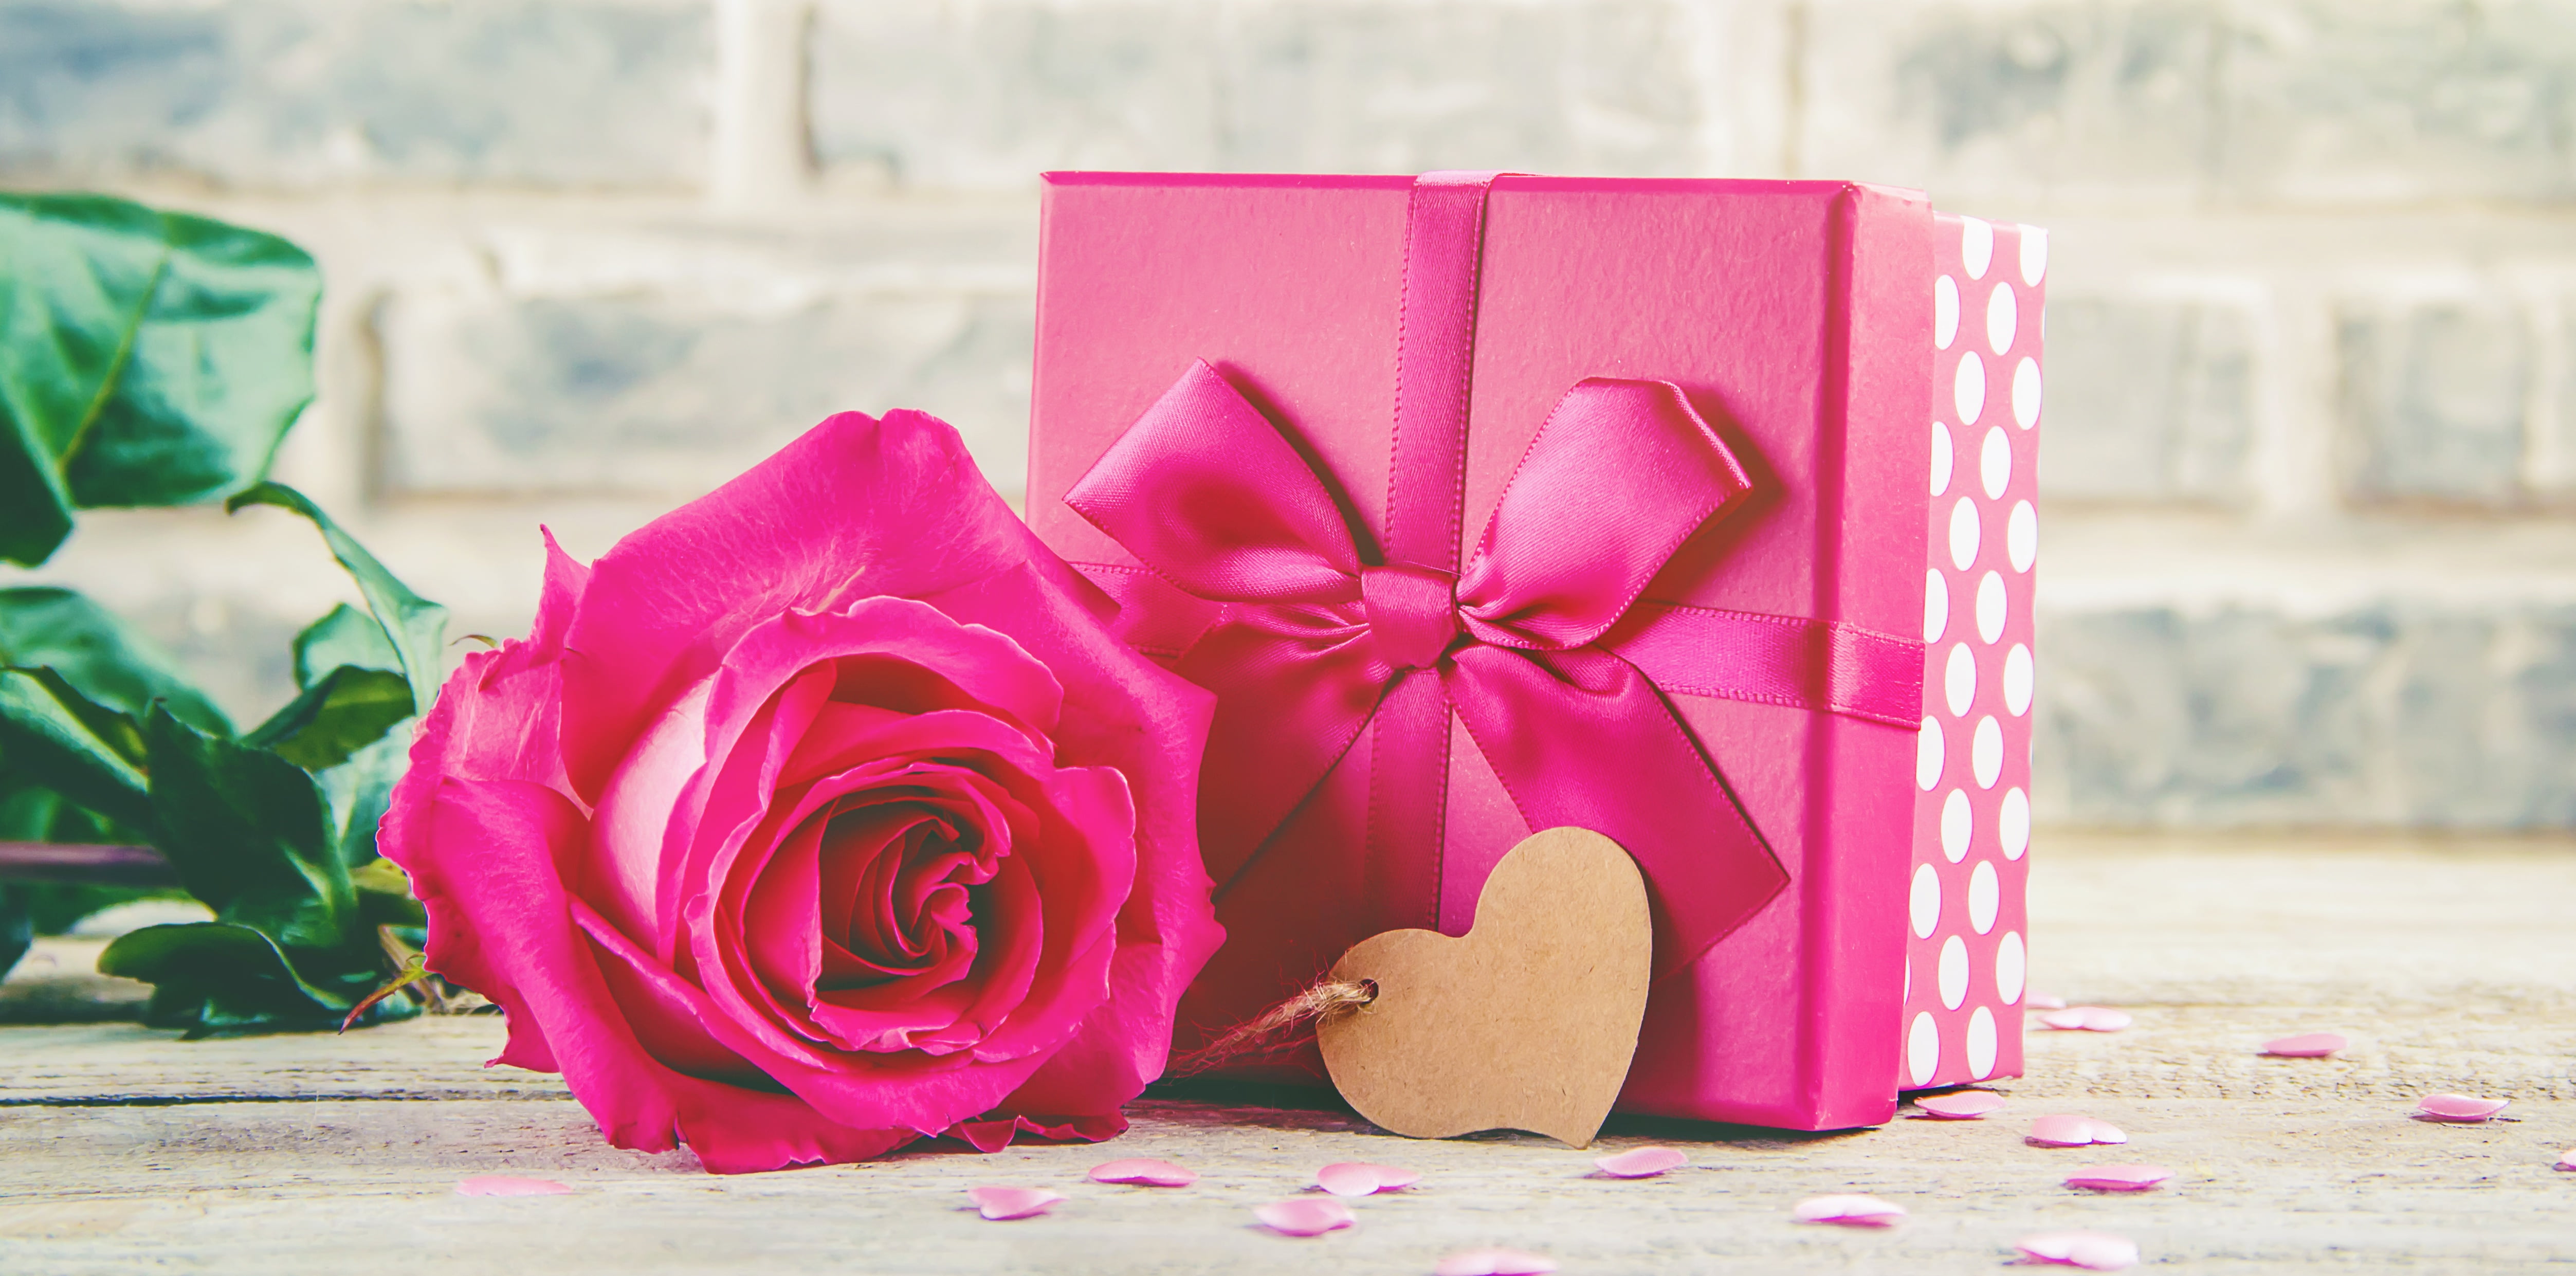 love, gift, heart, roses, bouquet, pink, flowers, romantic